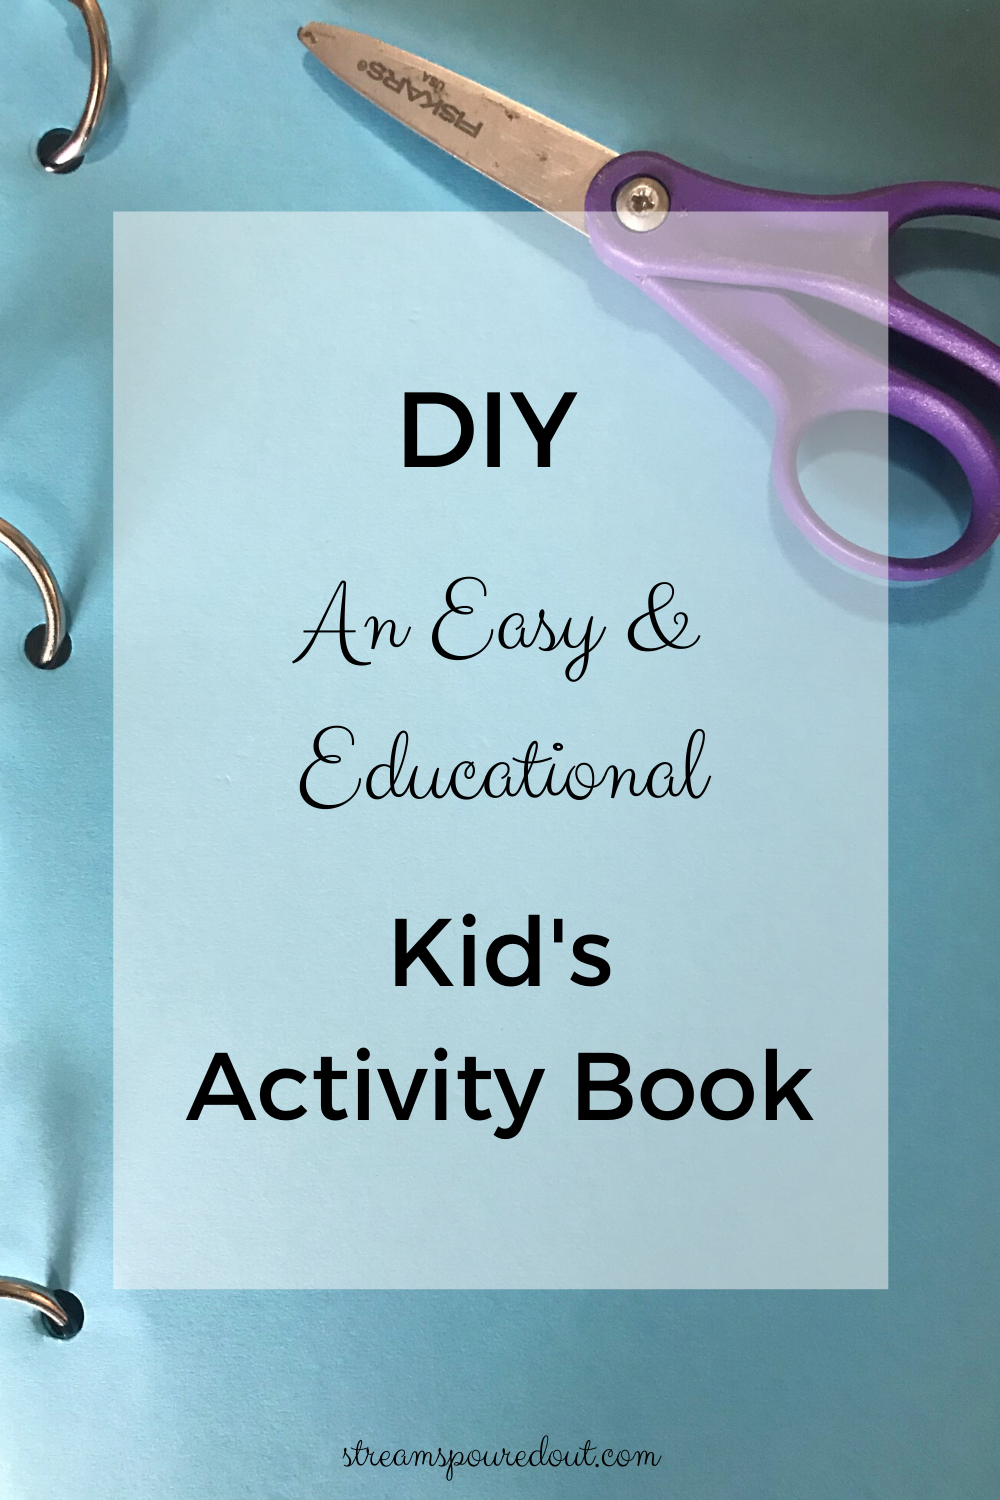 You are currently viewing DIY An Easy & Educational Kid’s Activity Book